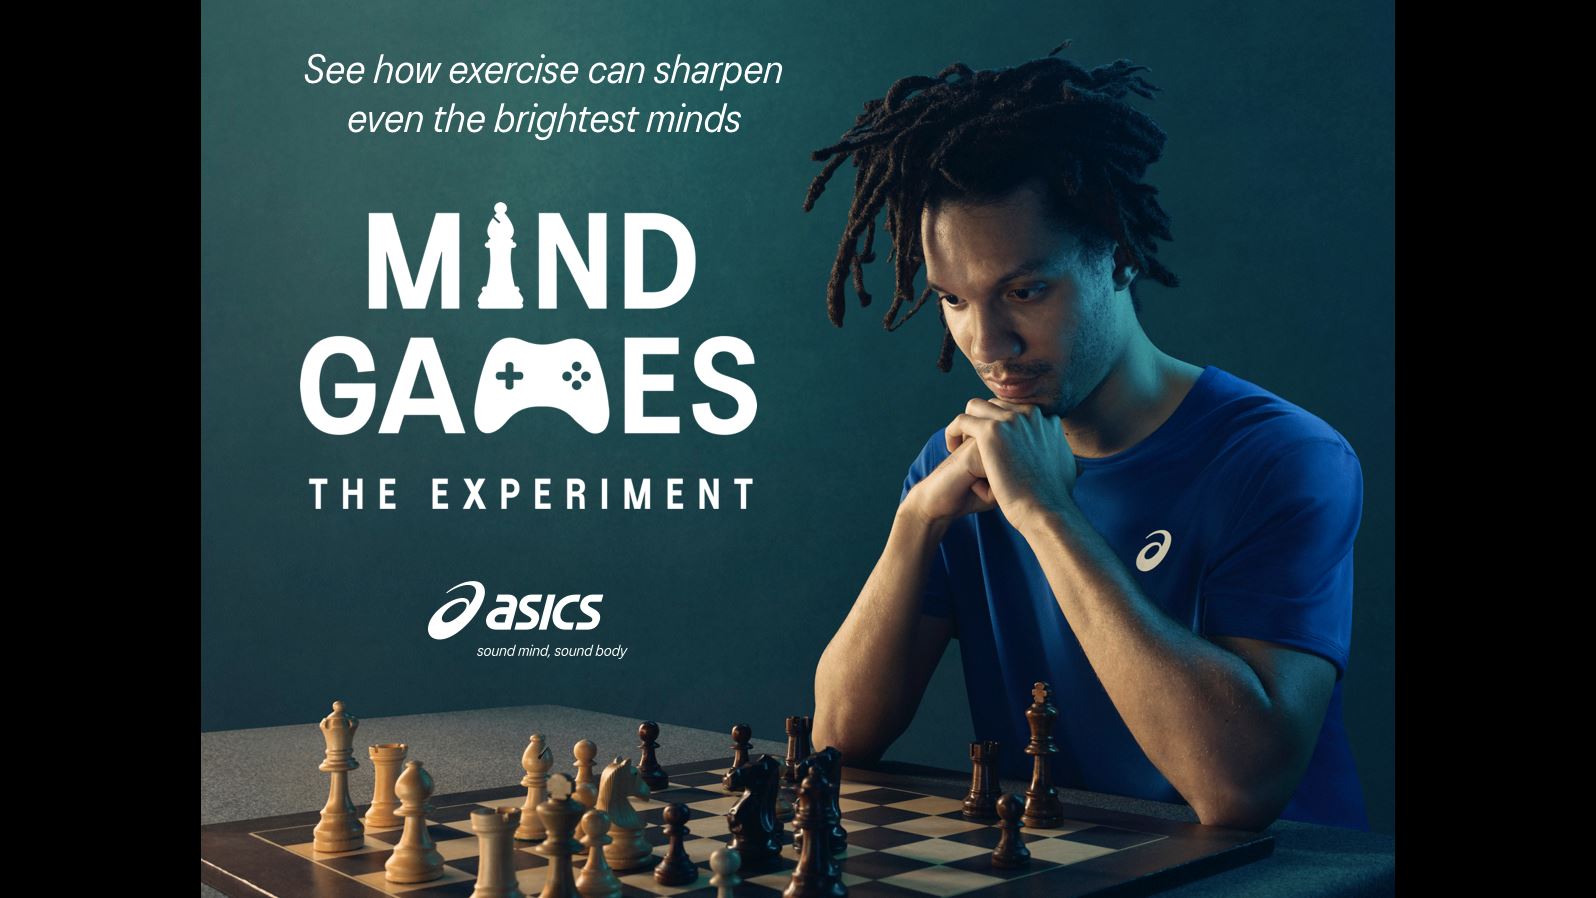 ASICS study shows exercise has the power to sharpen even the brightest minds and improve mental performance